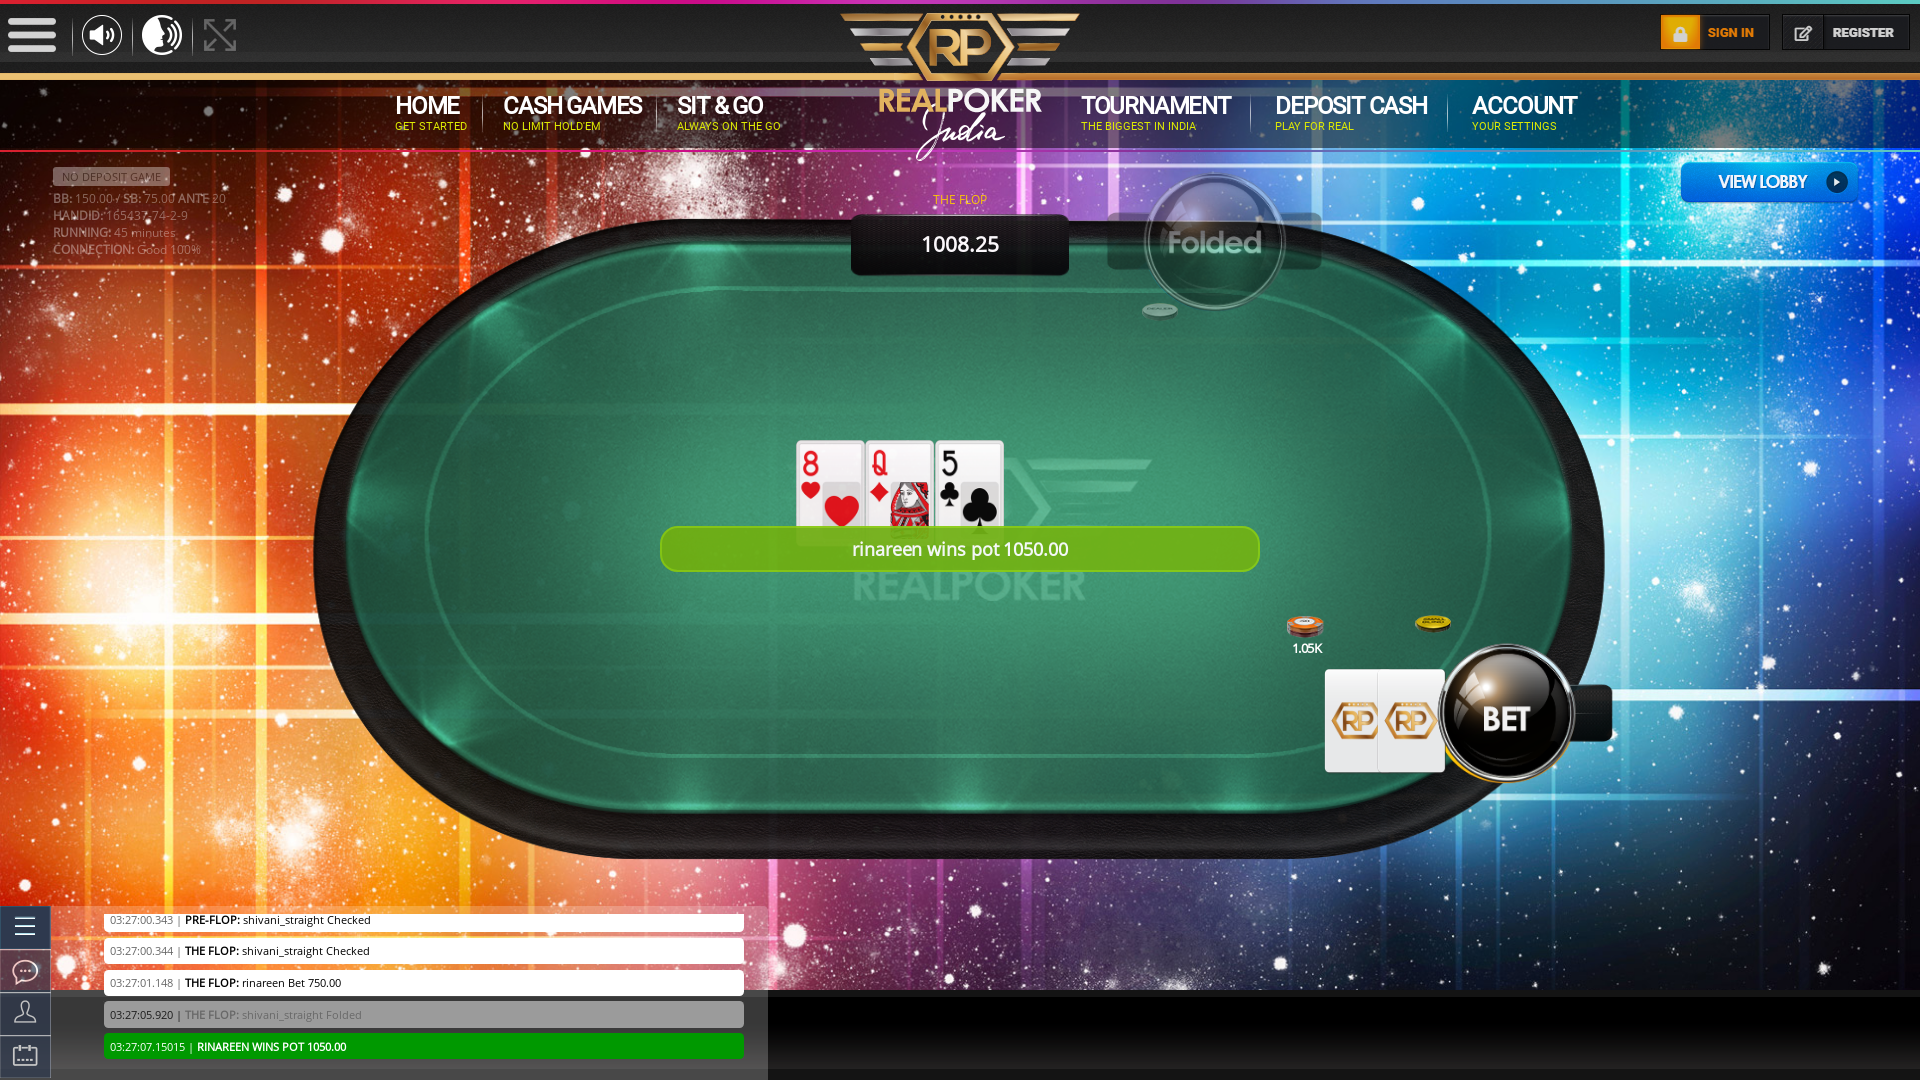 Indian poker on a 10 player table in the 44th minute